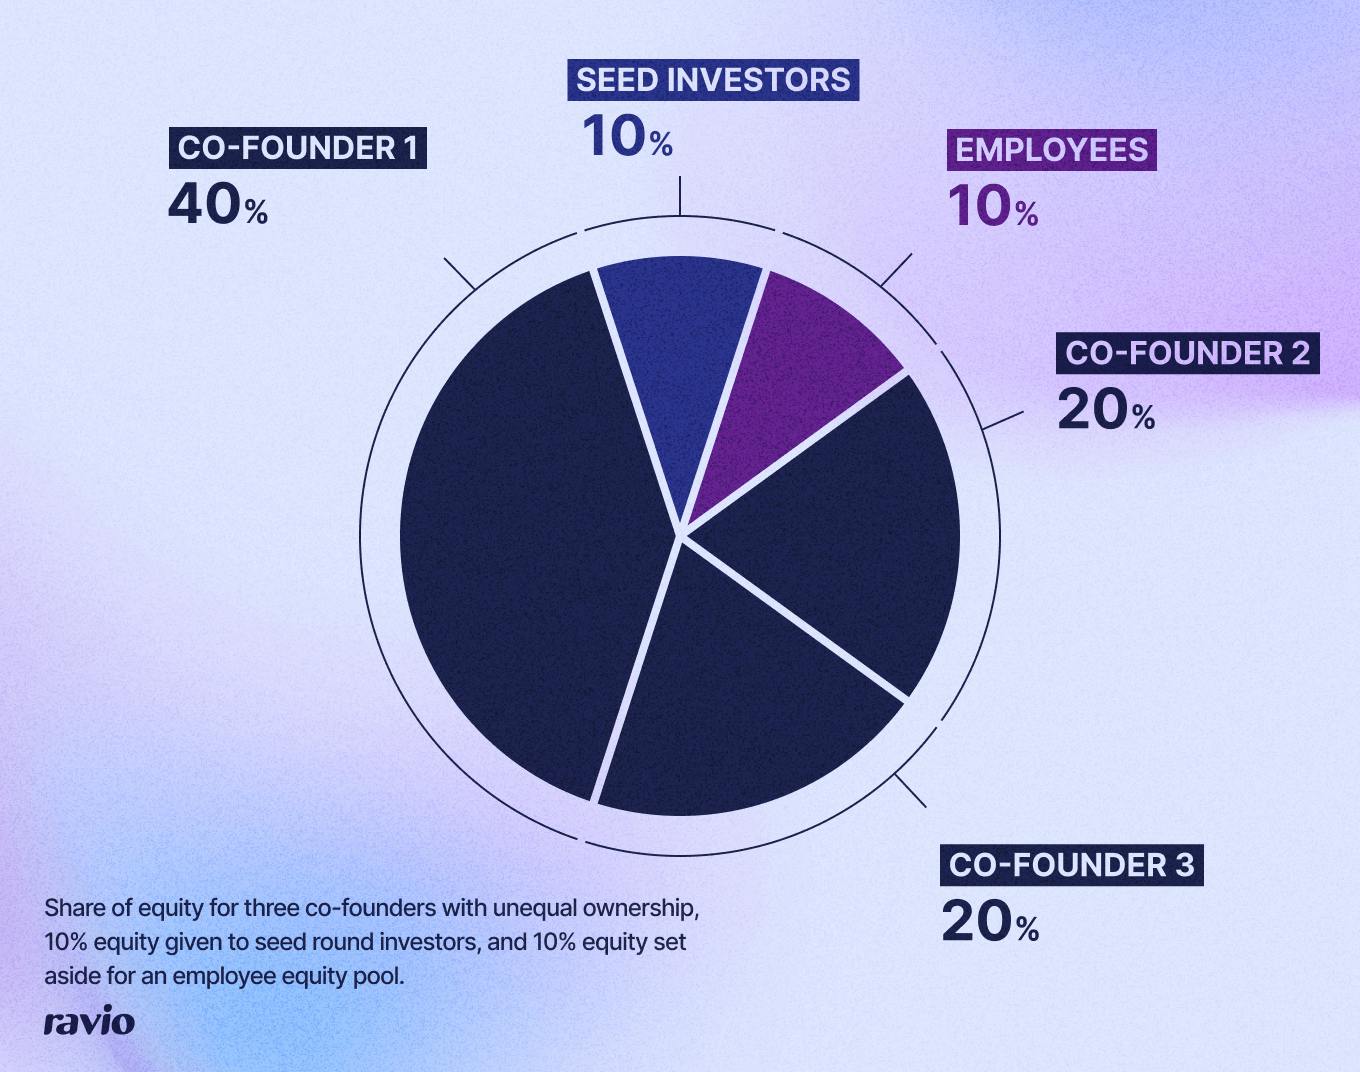 Pie chart showing 40% equity to co-founder 1, 20% to co-founders 2 and 3, 10% equity to seed investors, 10% equity to employees